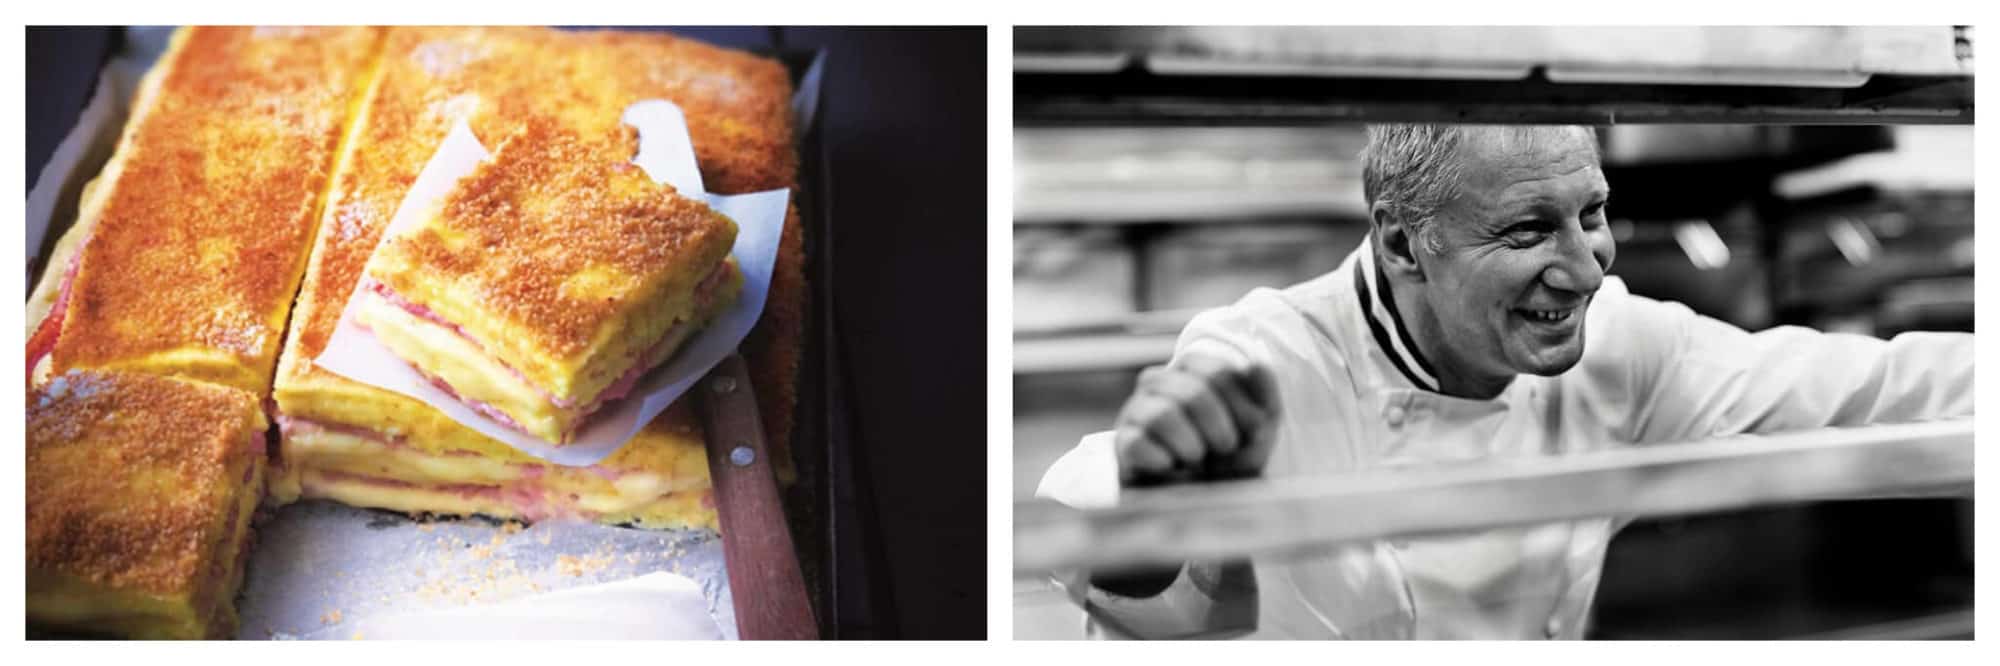 Left: A slice of Eric Frechon's delicious ham and cheese croque monsieur has been sliced and prepared to be served; underneath it are a knife and more croque monsieurs. Right: A black and white photo of Michelin-Star chef Eric Frechon, smiling in a restaurant kitchen.